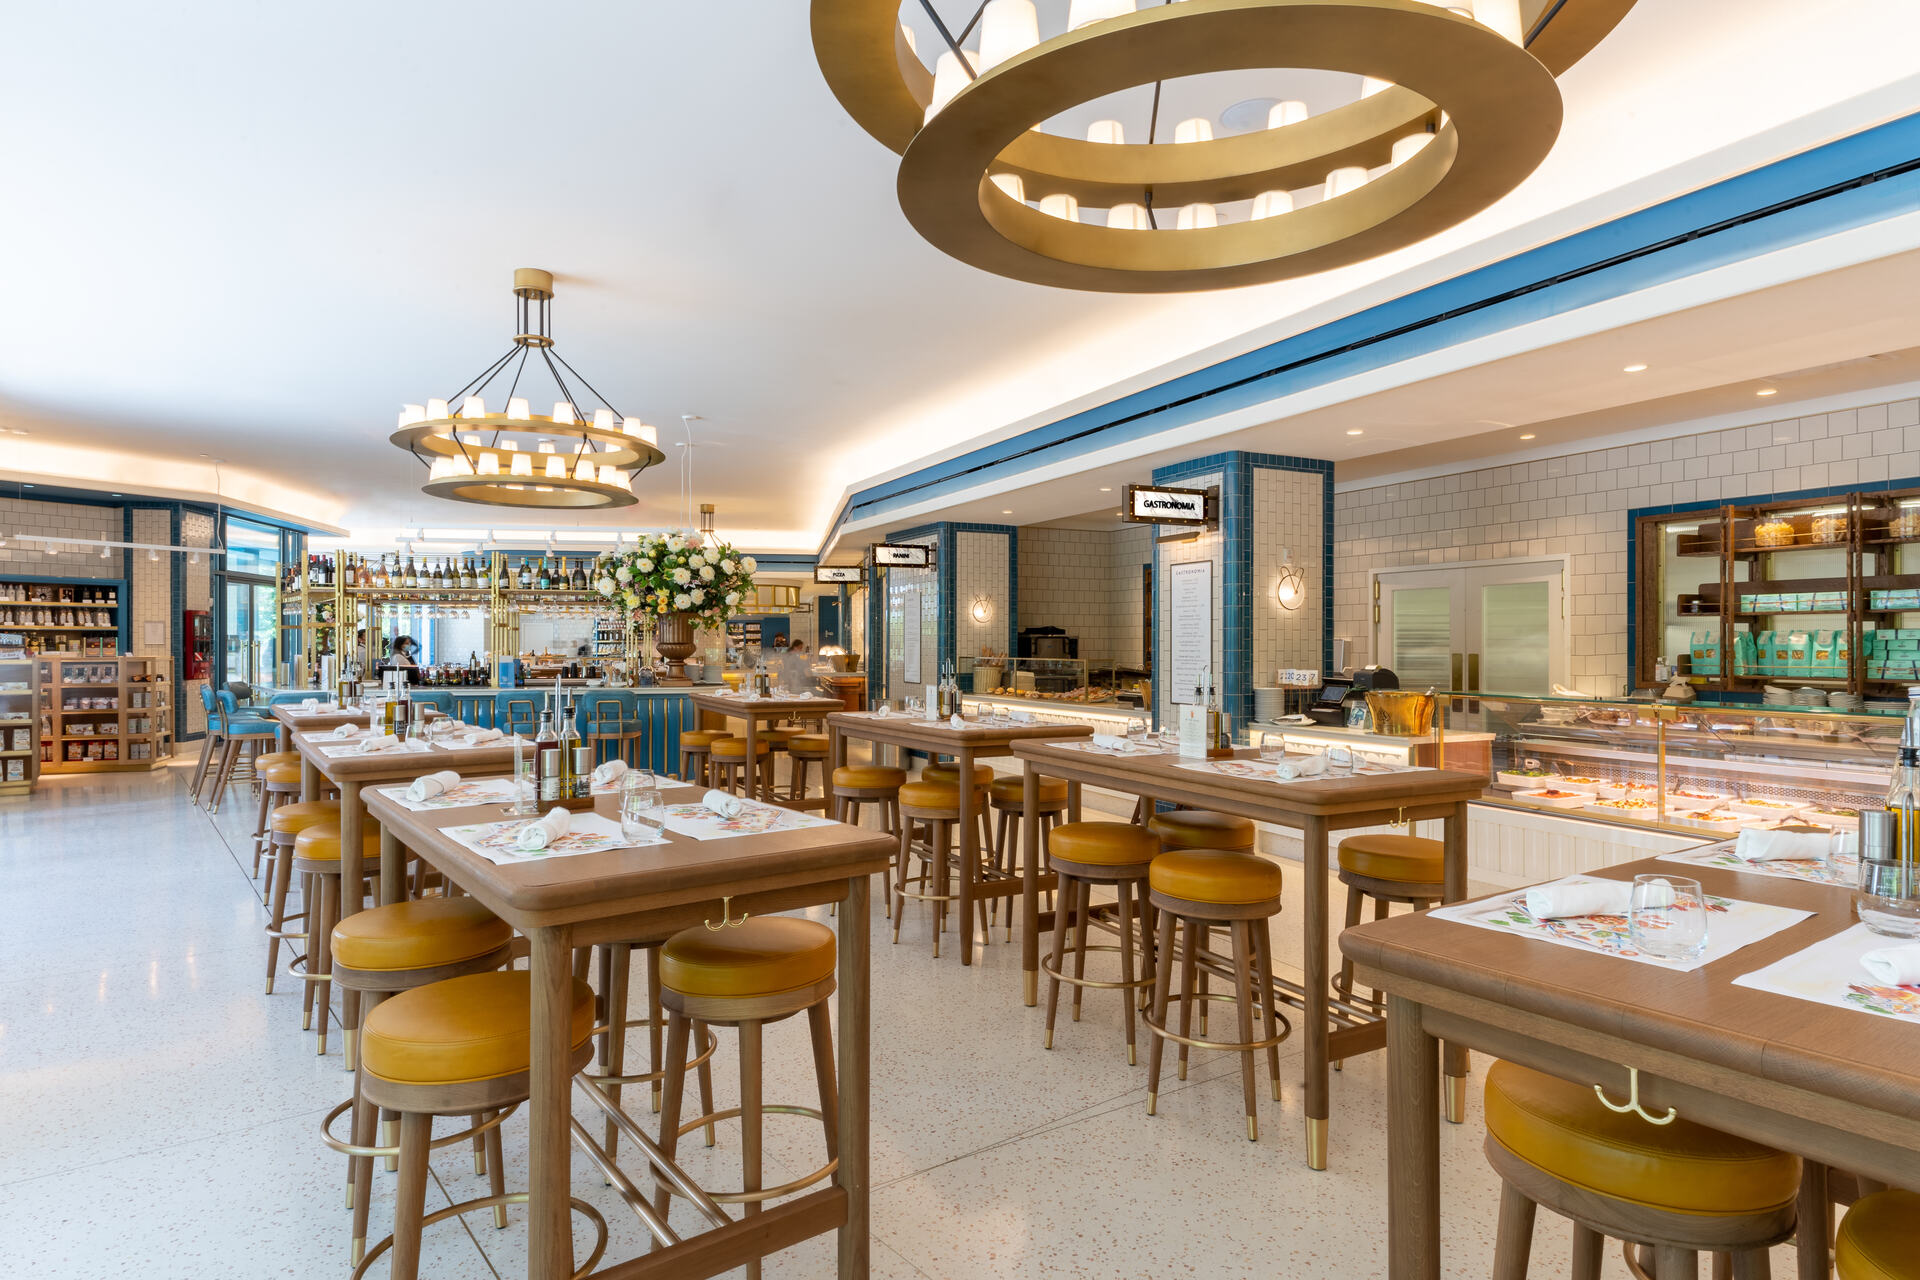 An elegant and spacious diner-style restaurant with retro-inspired design, featuring a central bar with stool seating, circular chandeliers, and a bright, welcoming ambiance.